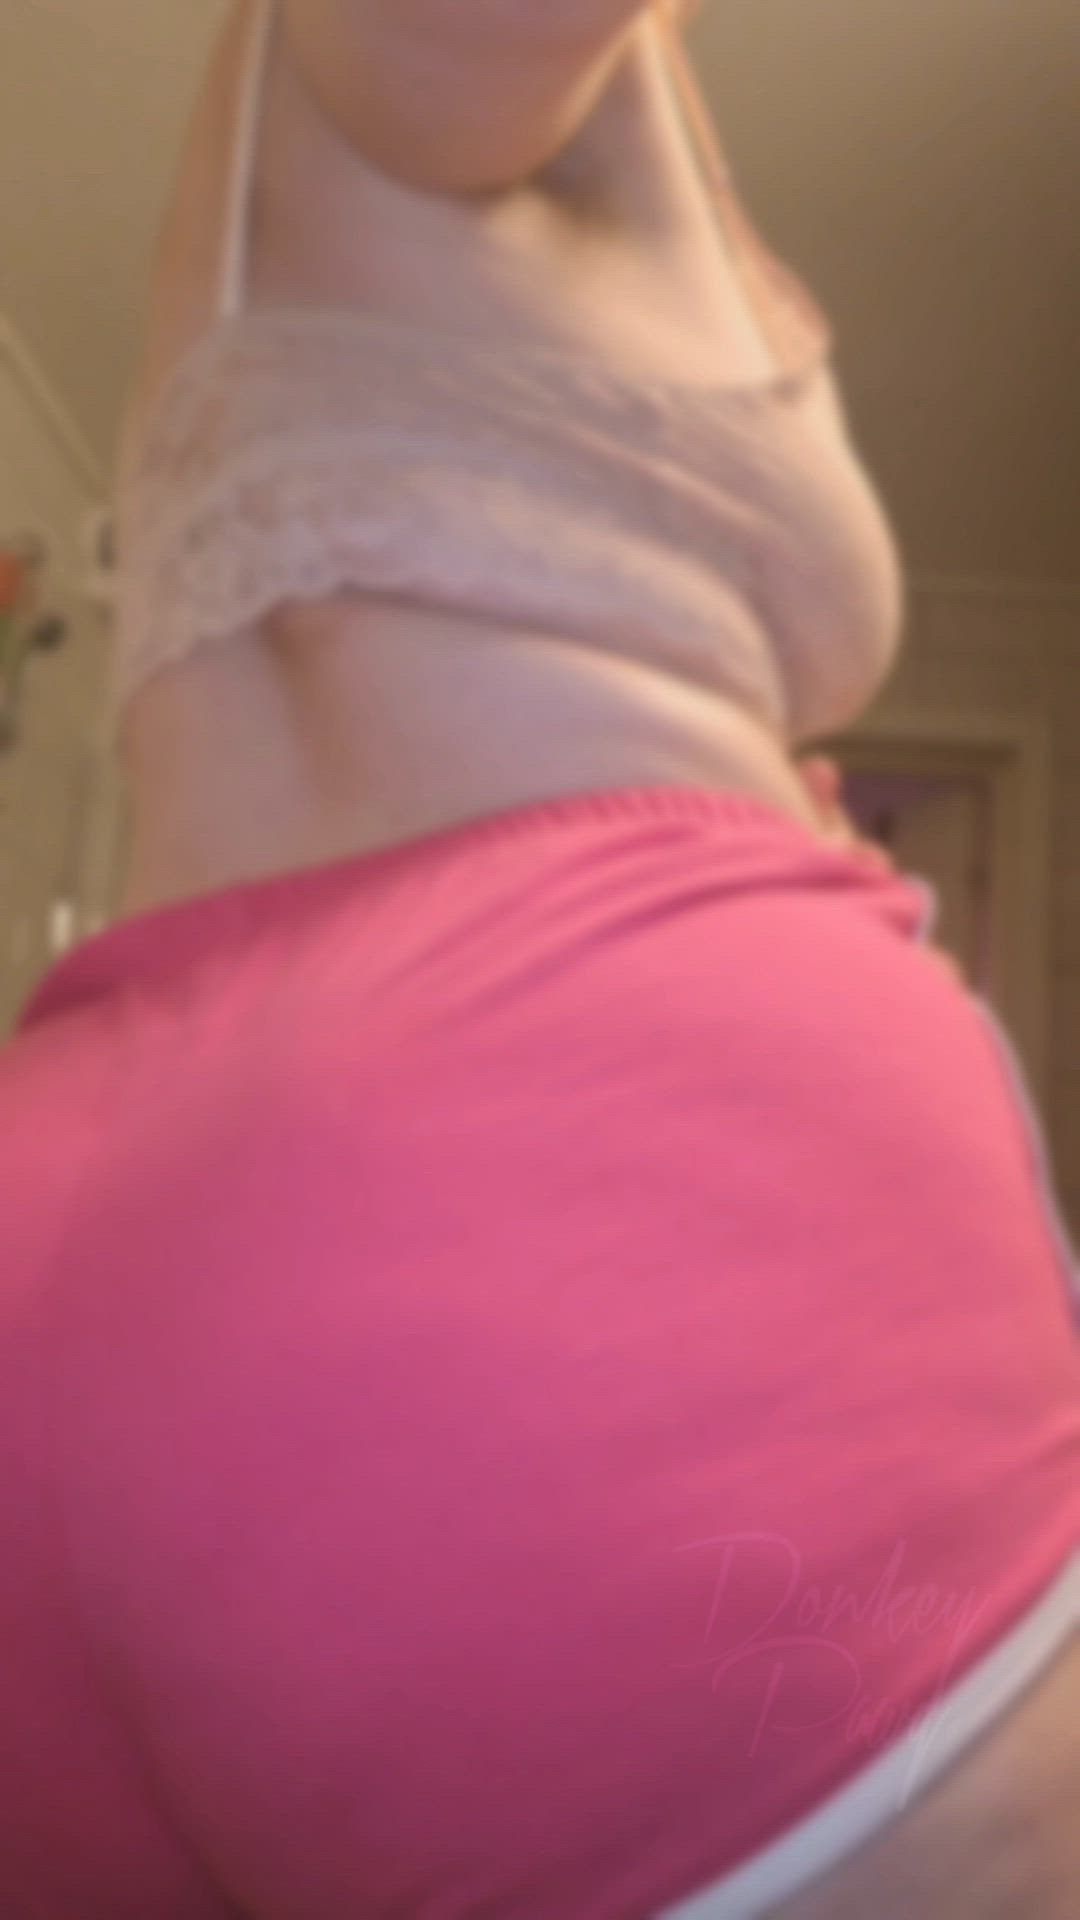 Ass porn video with onlyfans model Donkey PAWG <strong>@donkeypawg</strong>